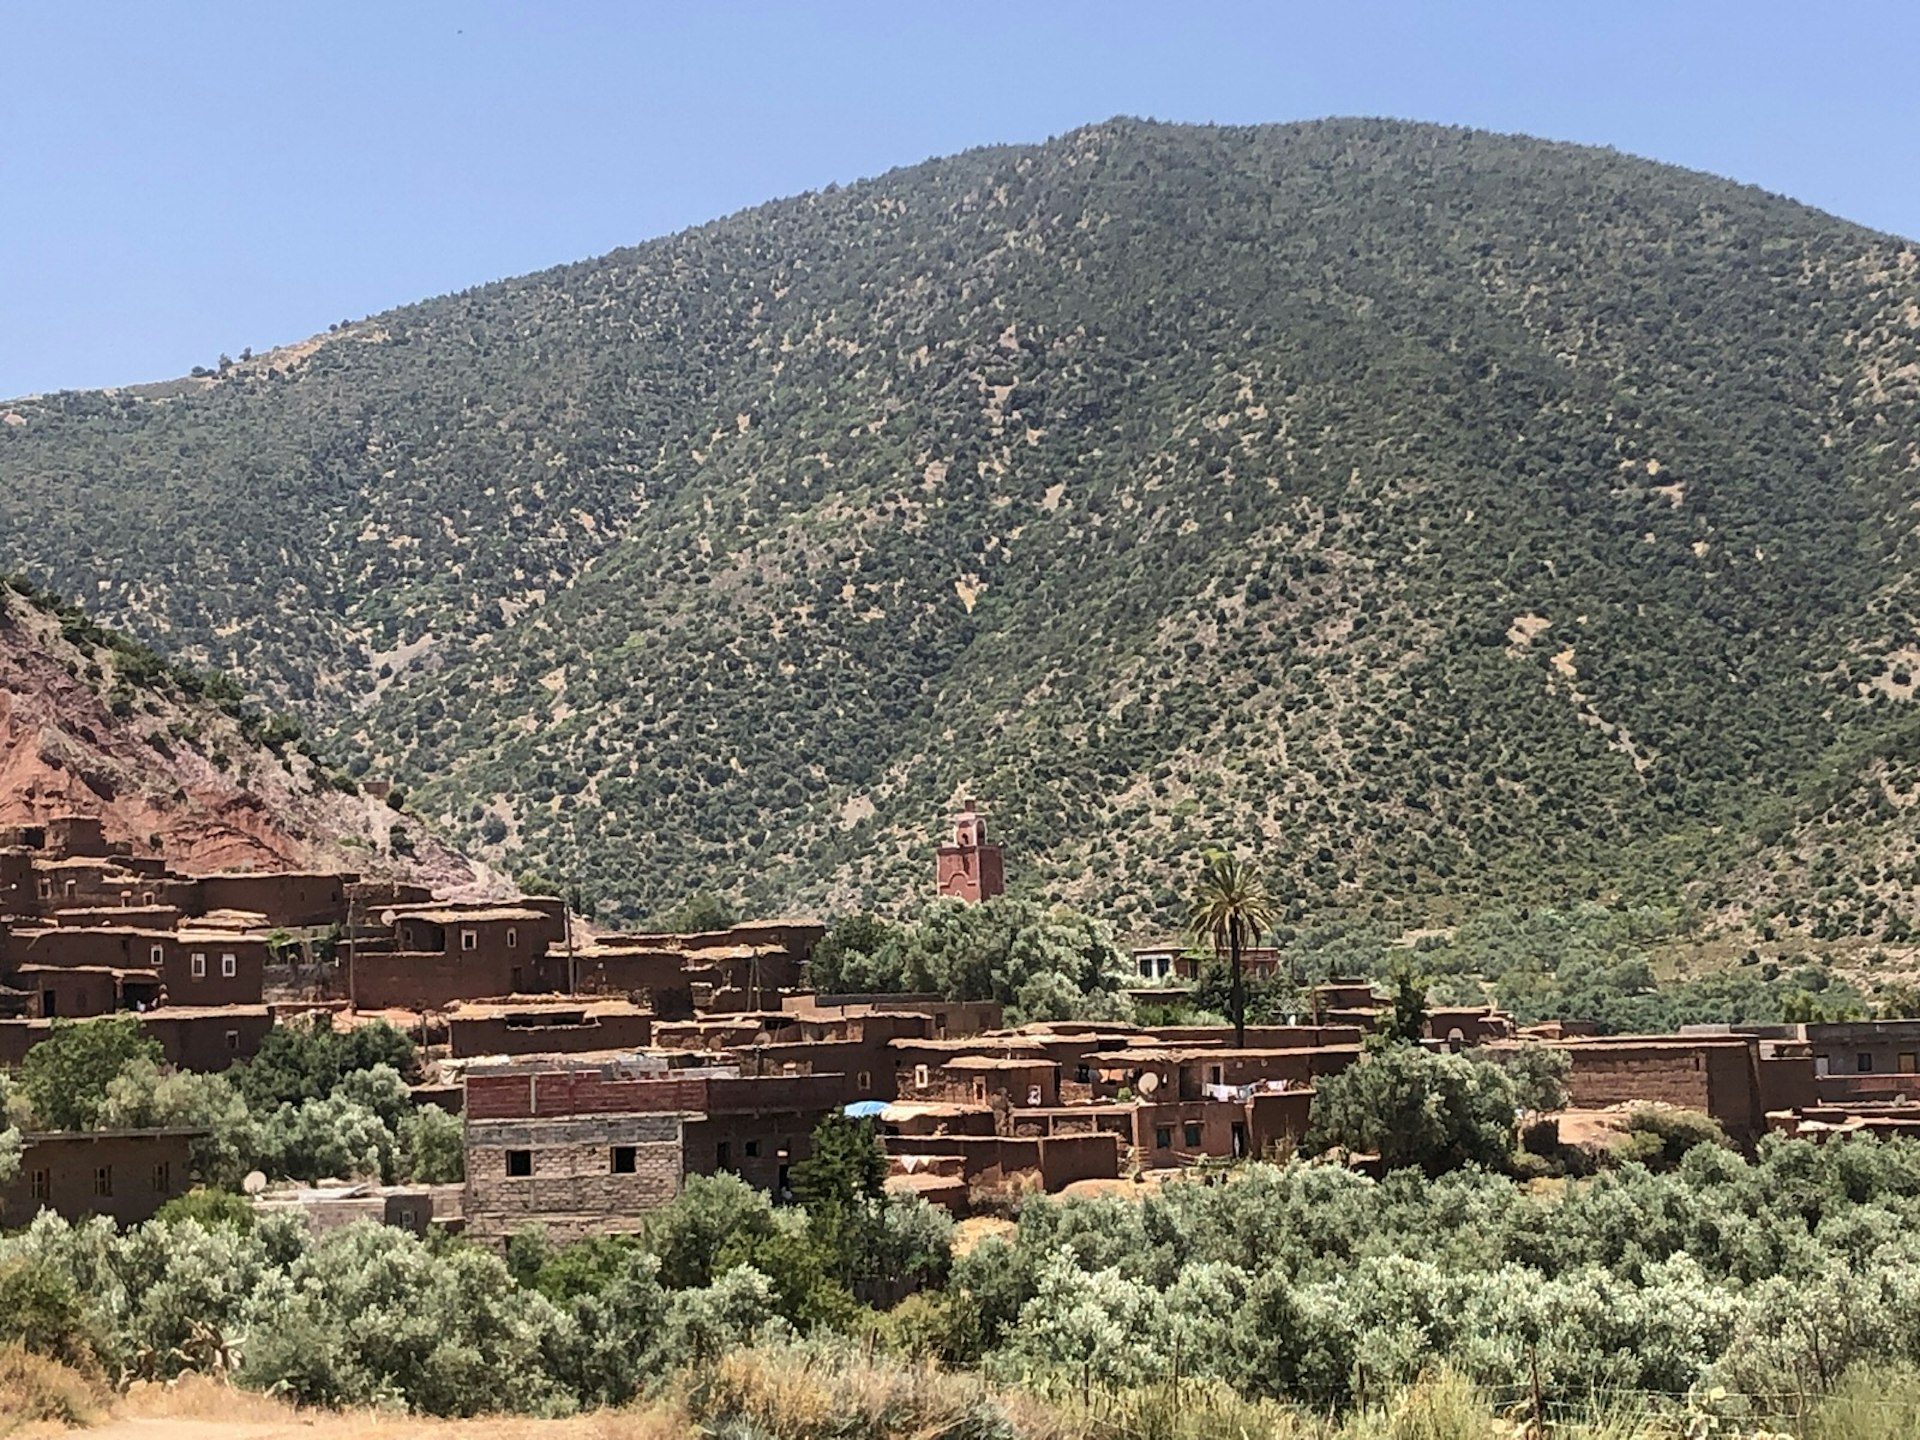 A mud-brick village sits nestled amongst scrub vegetation in the foothills of the Atlas Mountains.